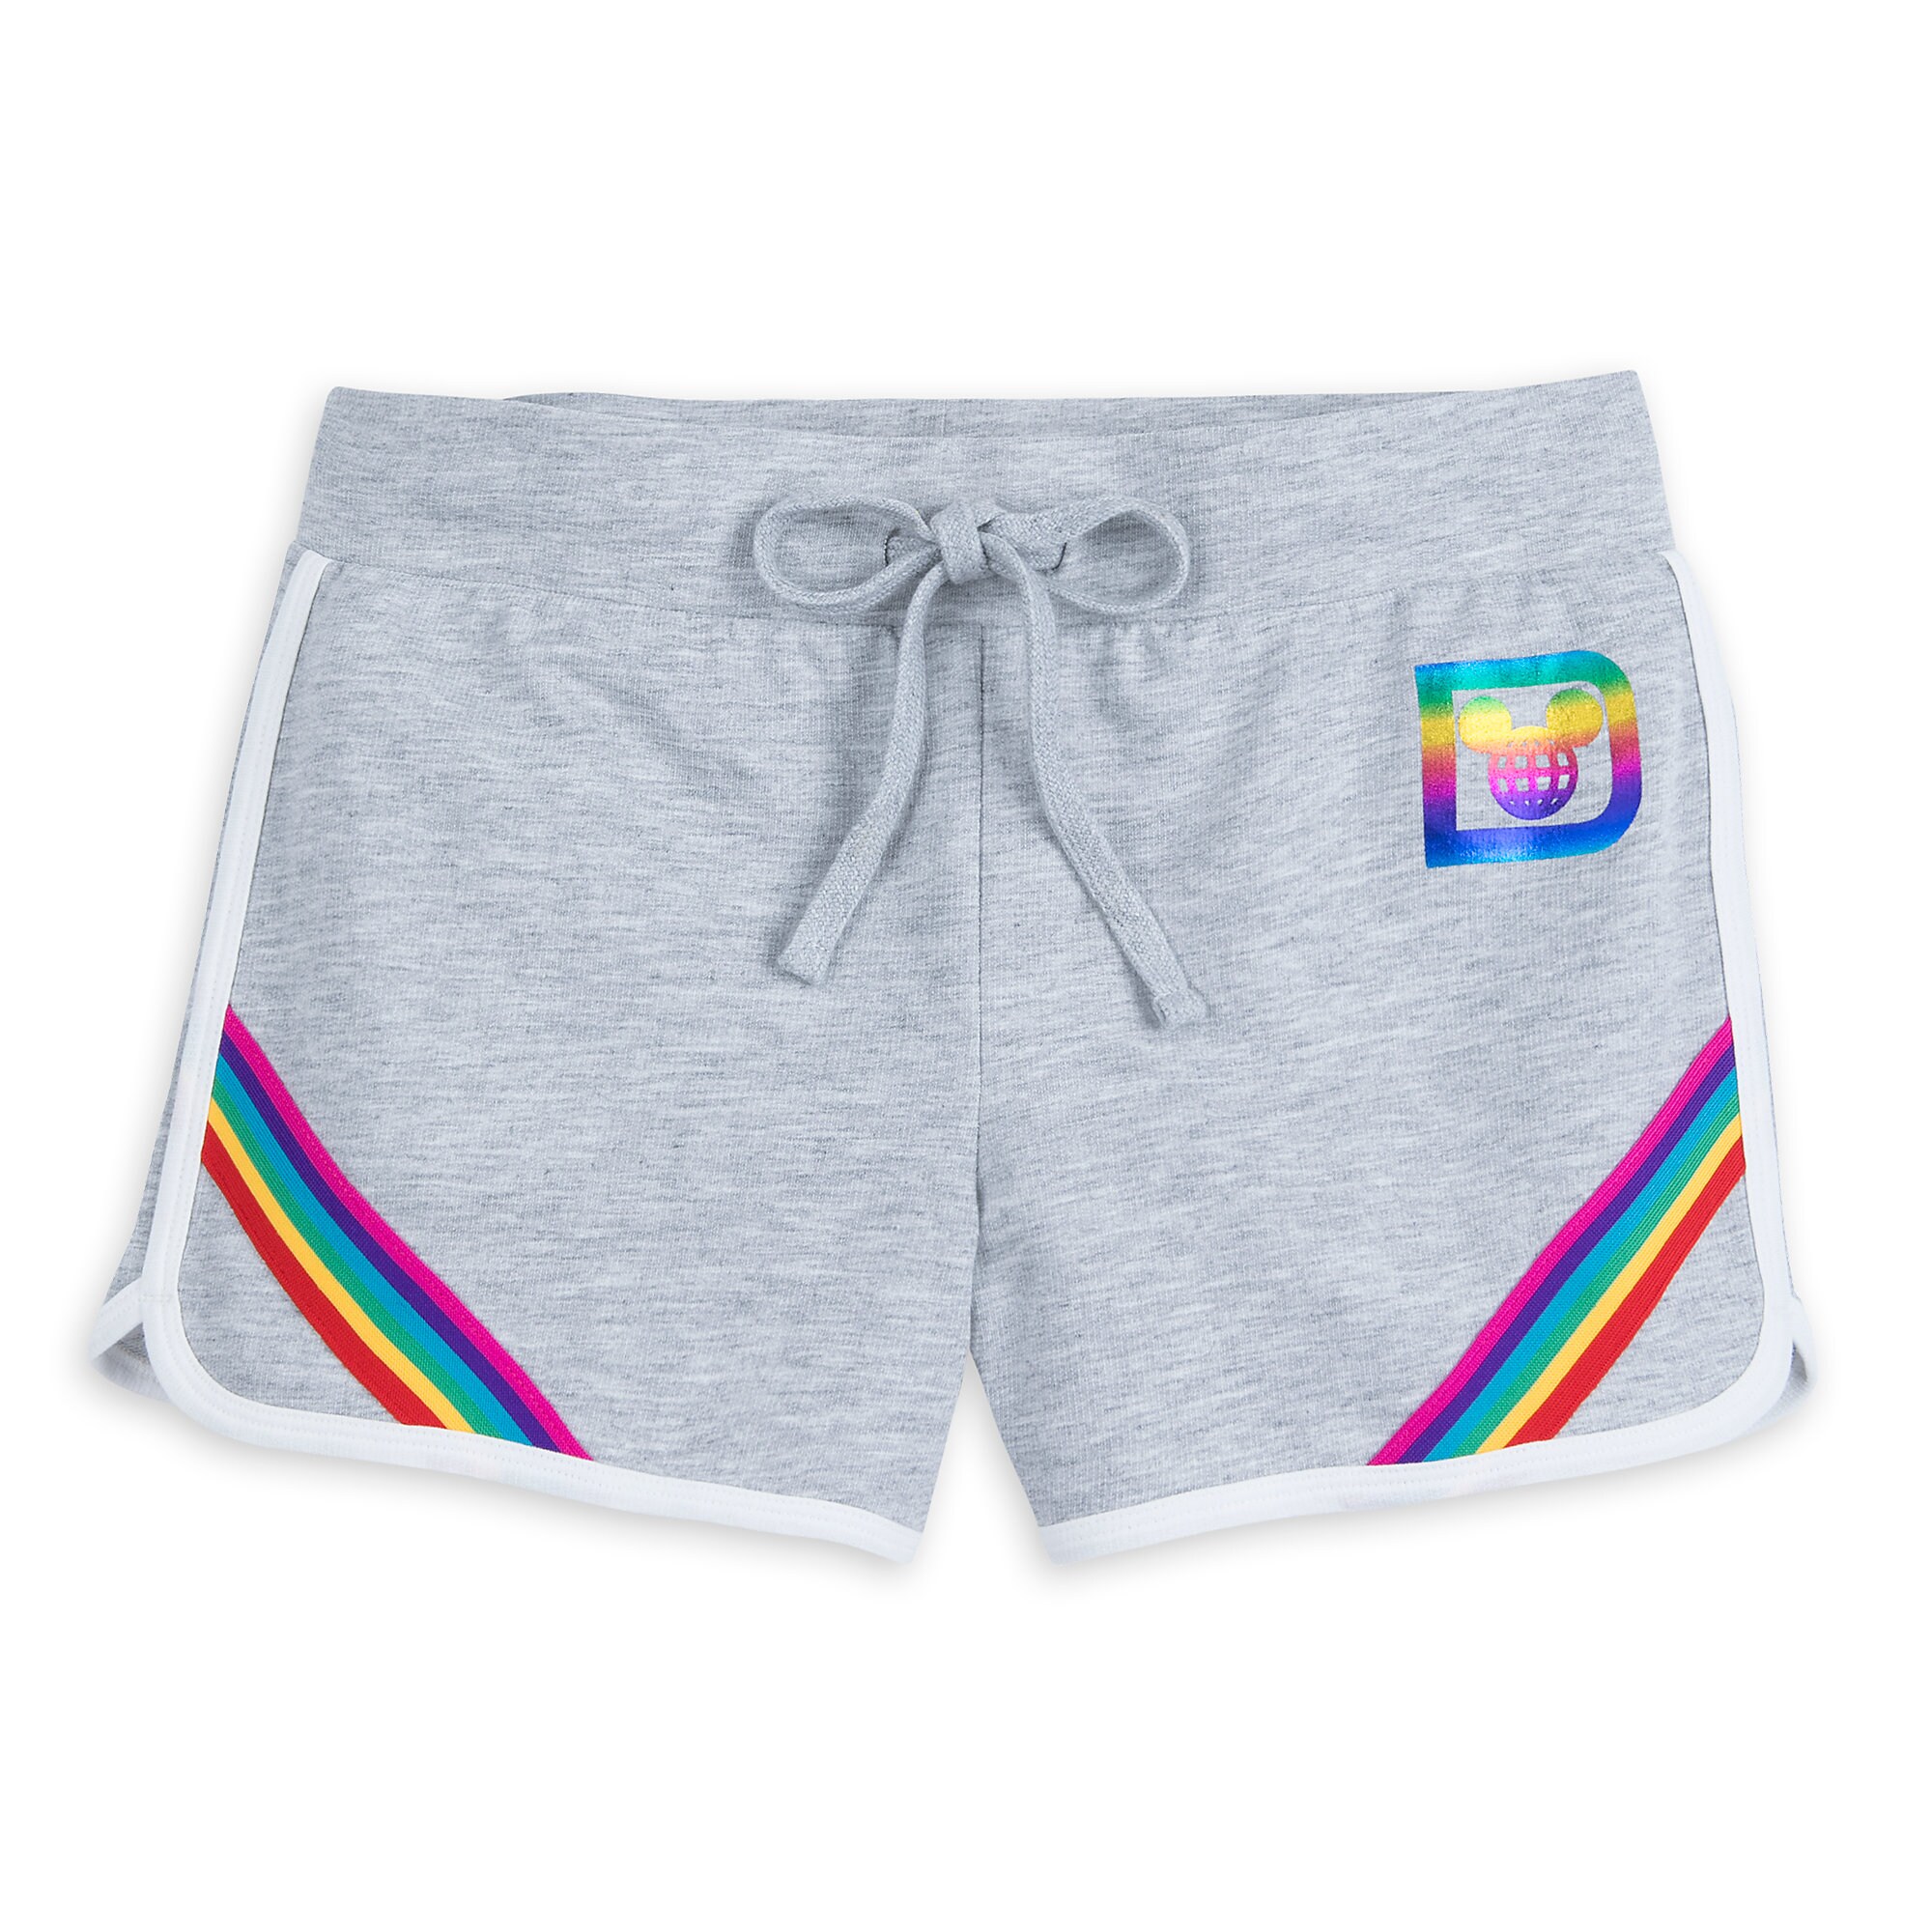 Walt Disney World Rainbow Shorts for Women was released today – Dis ...